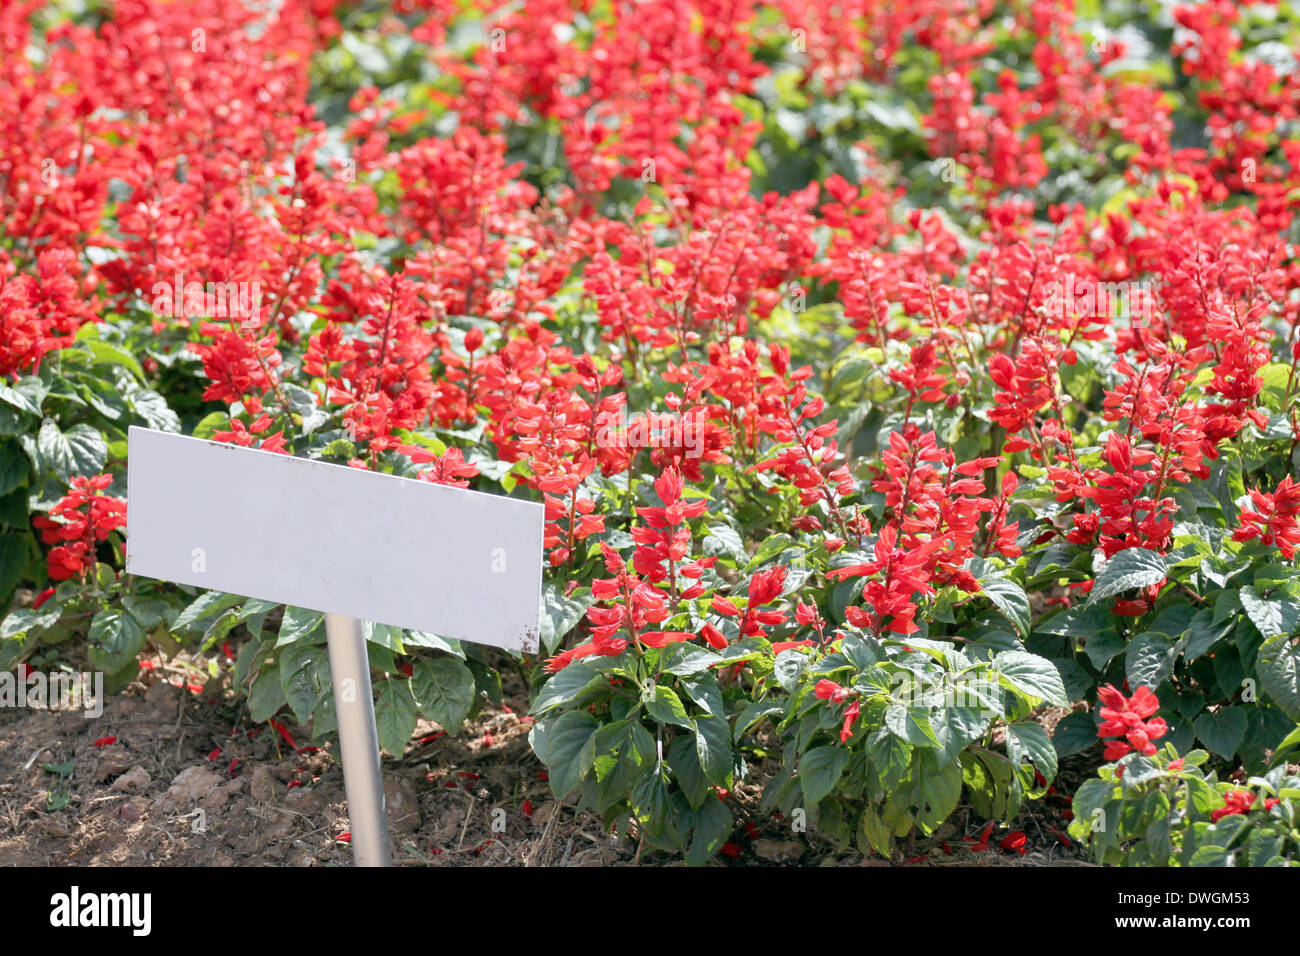 Flower Garden Red salvia and label to shown. Stock Photo